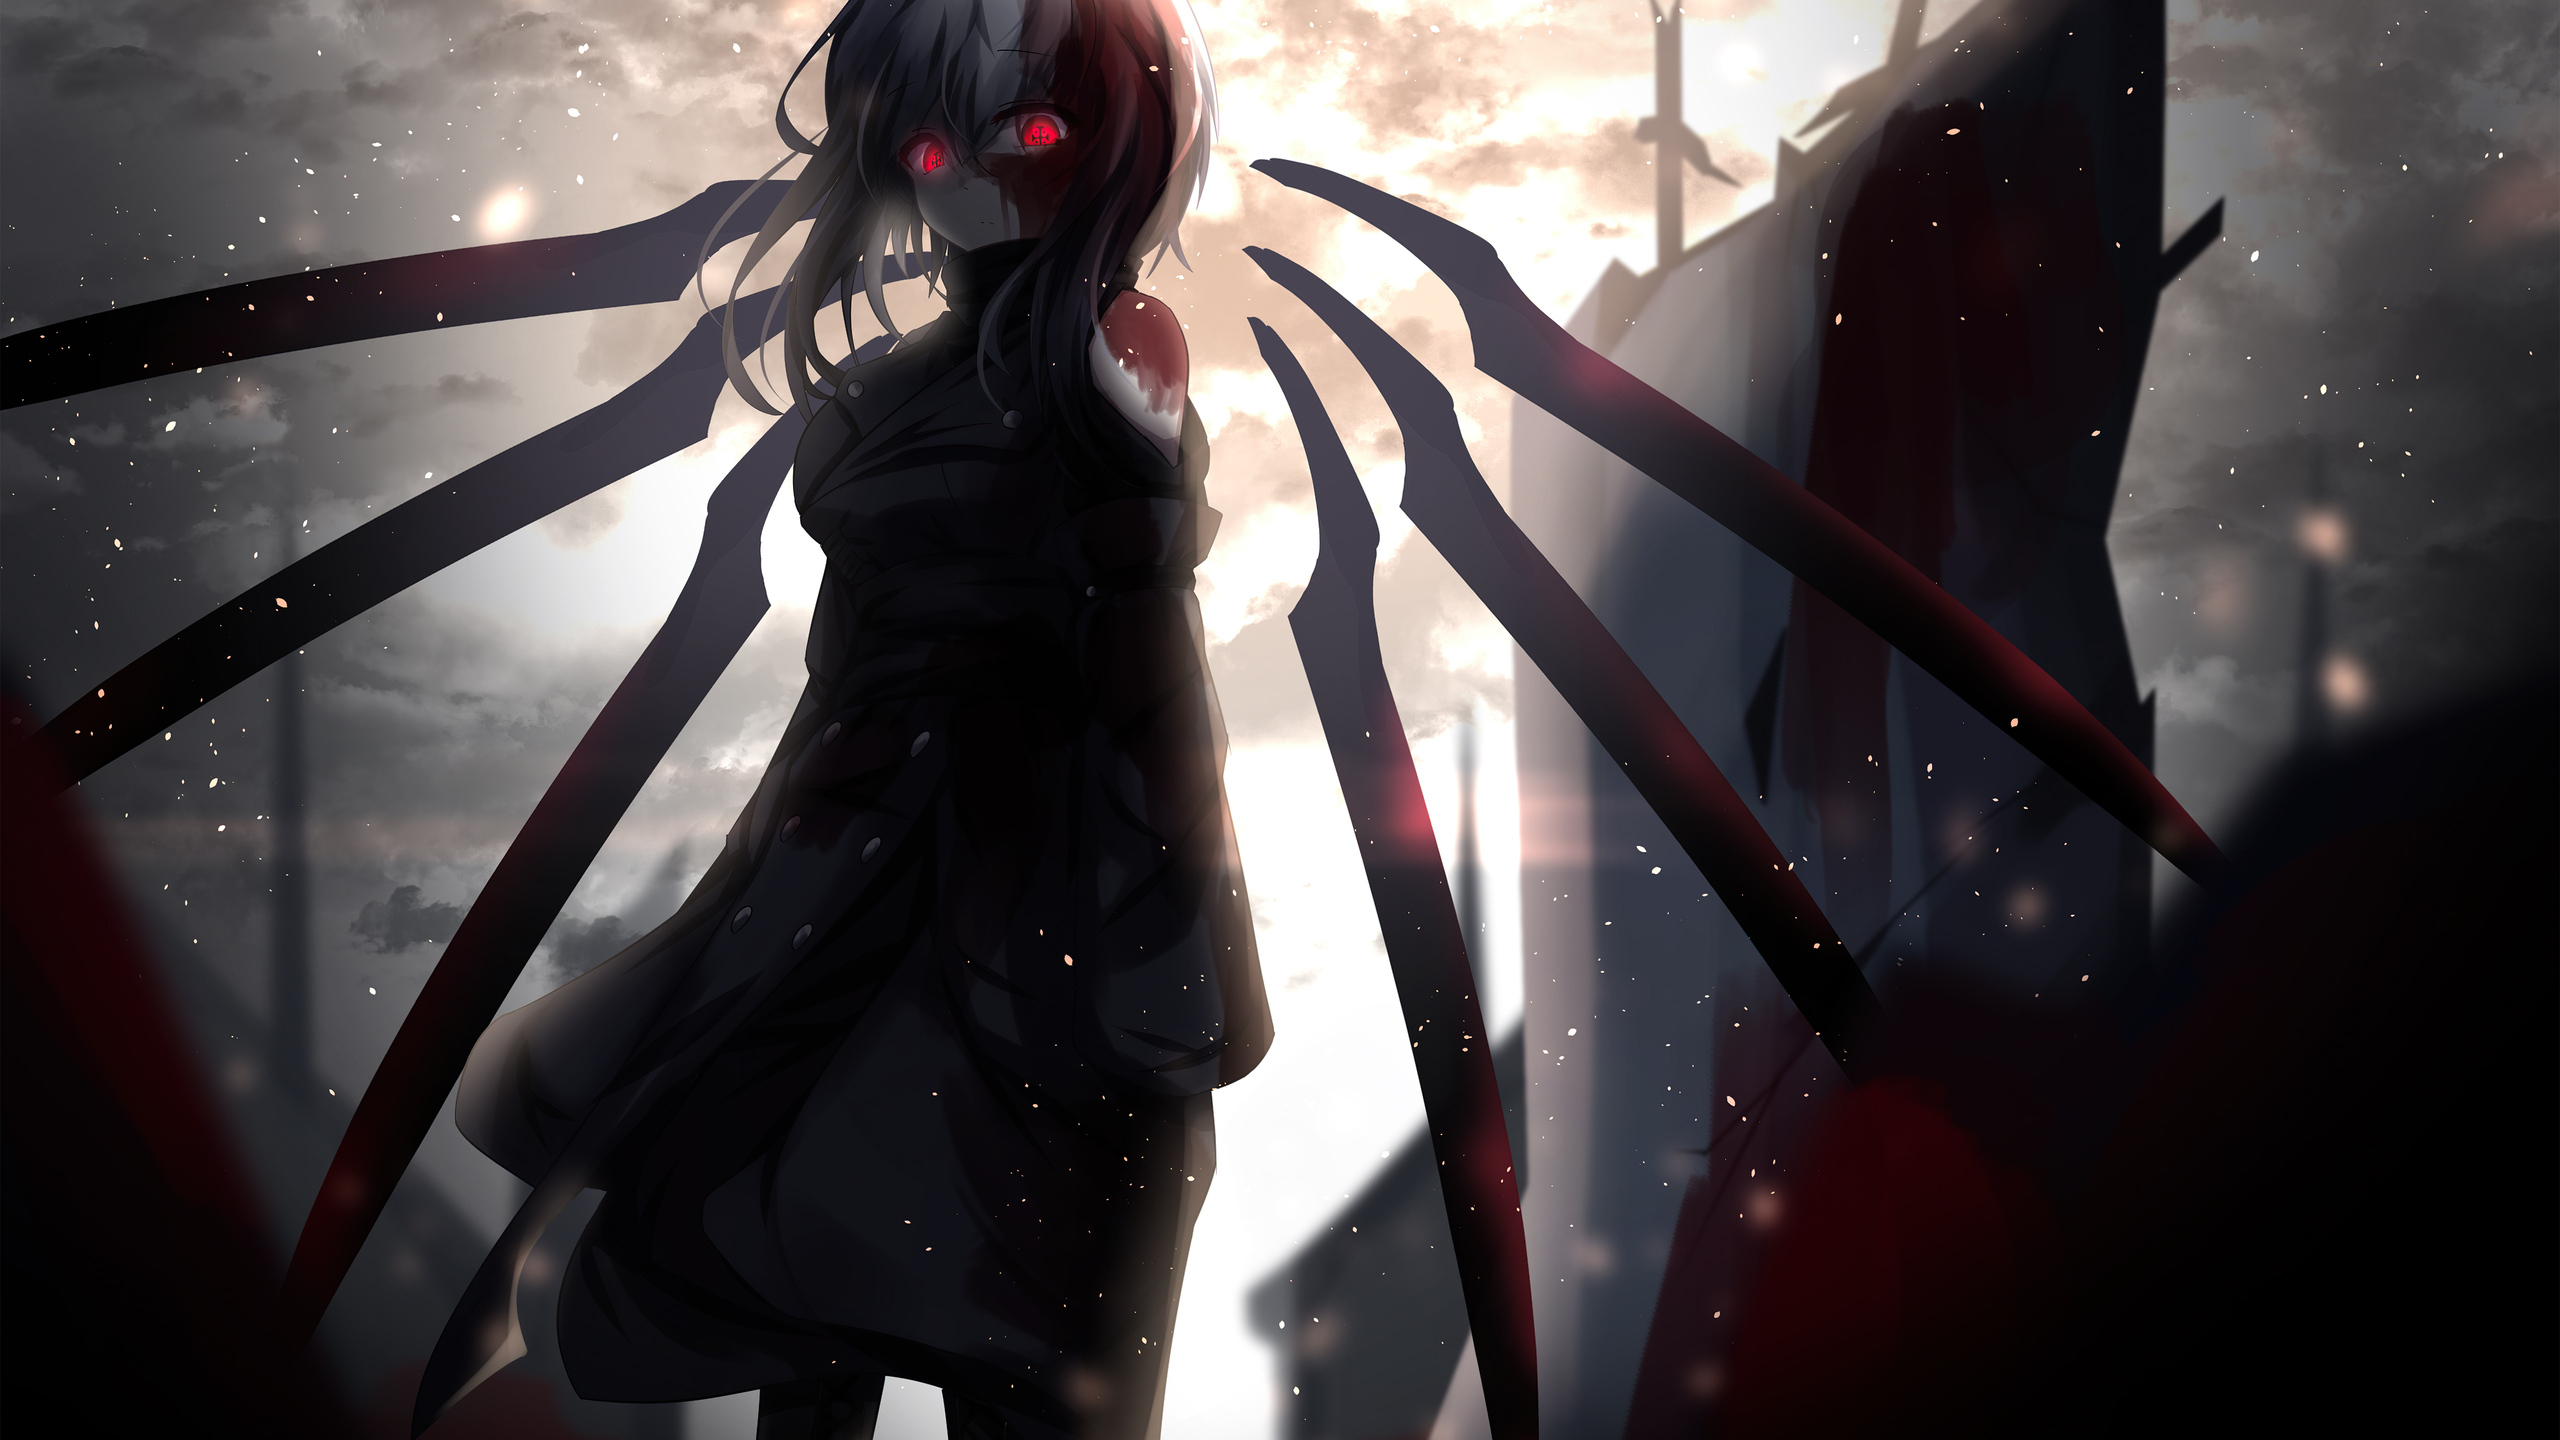 Red Glowing Eyes Anime Girl 5k 1440P Resolution HD 4k Wallpaper, Image, Background, Photo and Picture